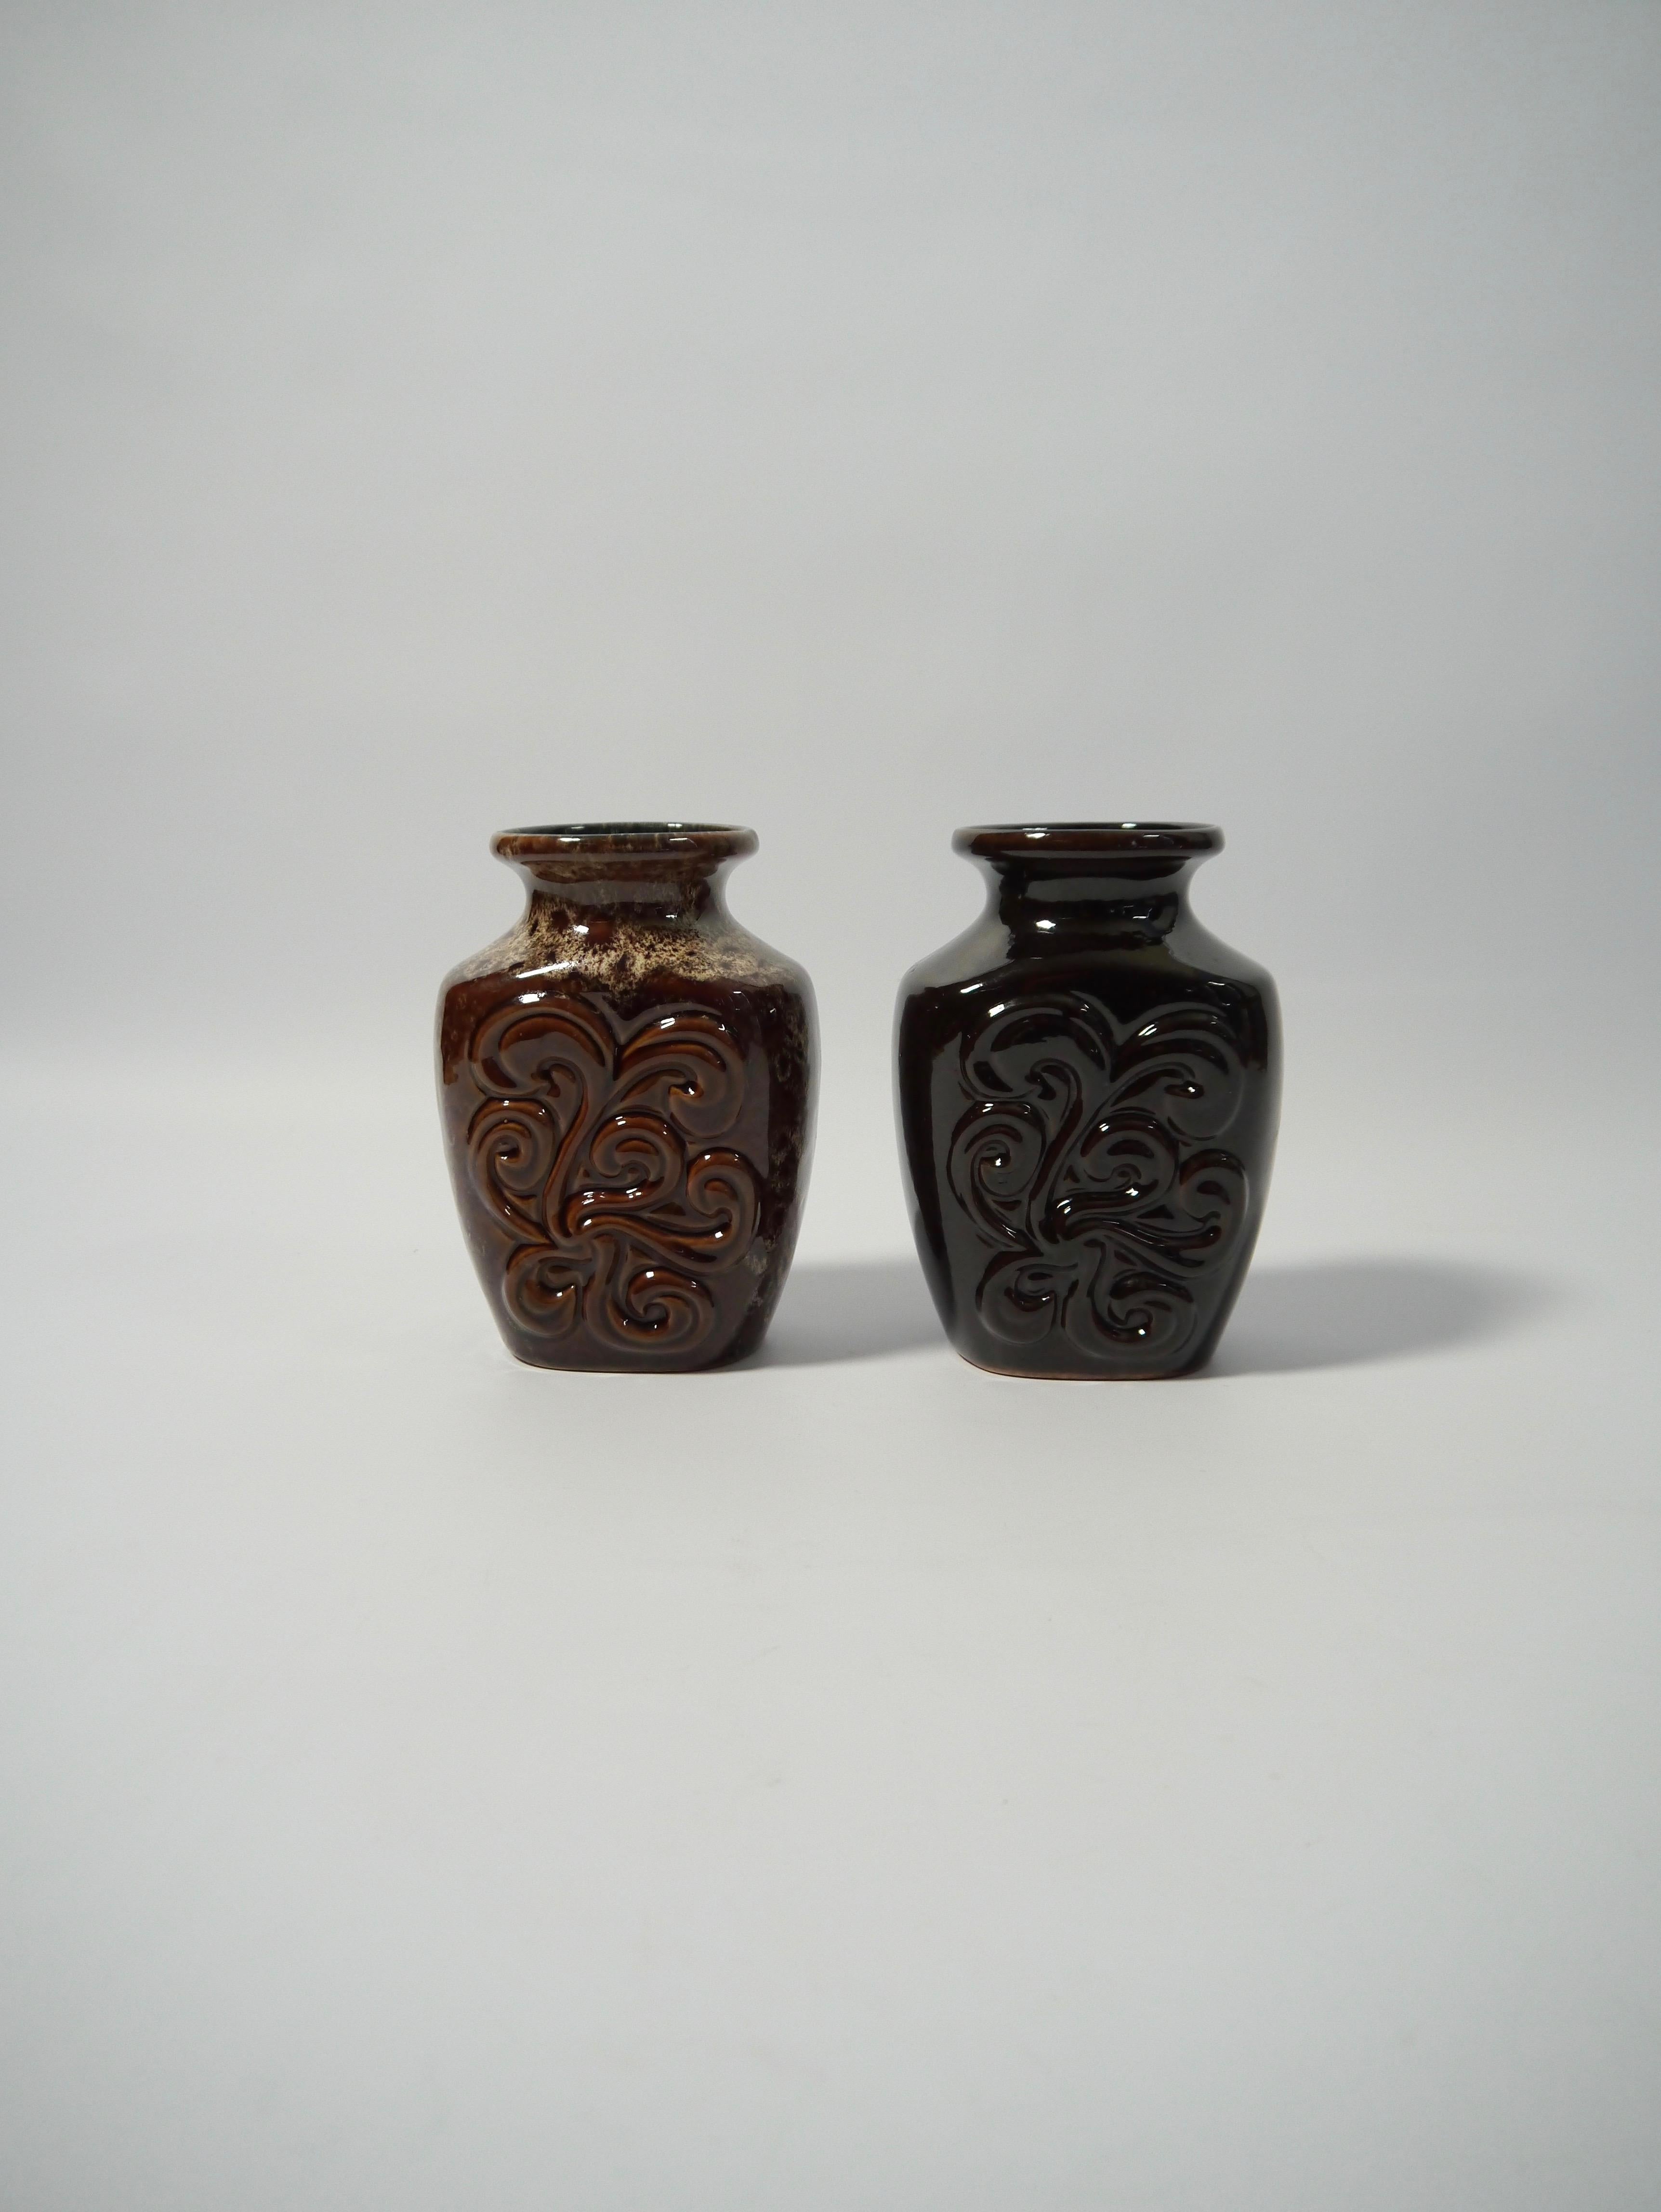 Pair of German pottery vases fabricated by Strehla former East Germany in the 1960s. One vase deep black glaze, the other in a speckled brown glaze, but both identical in dimension, shape and organic floral pattern.